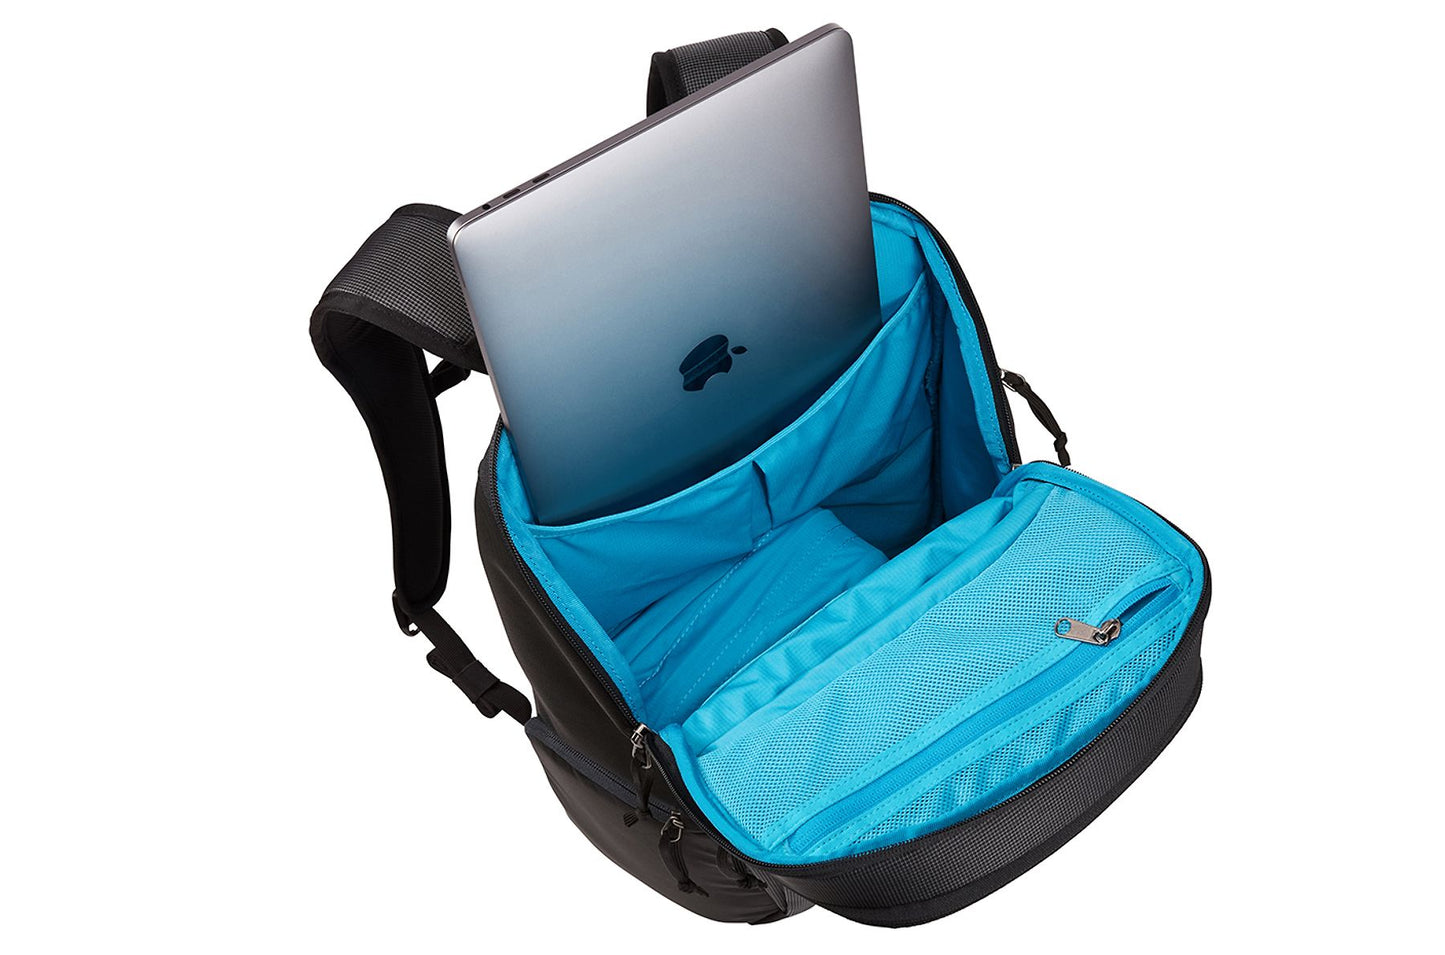 On Sale- THULE EnRoute 20L camera backpack with small laptop compartment